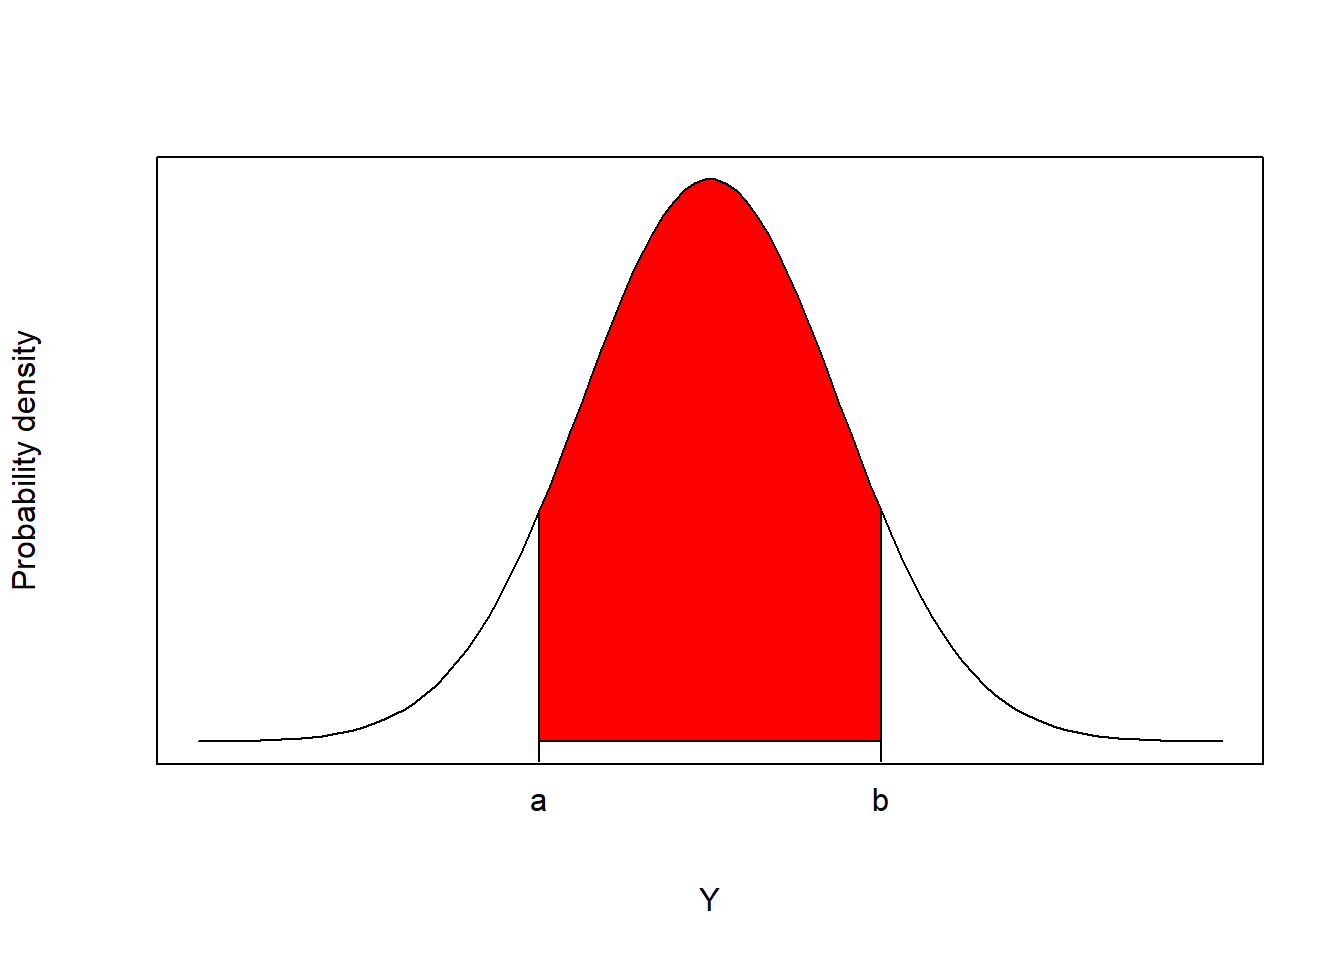 For continuous random variables, probabilities are defined as the areas under the curve of a probability density function.